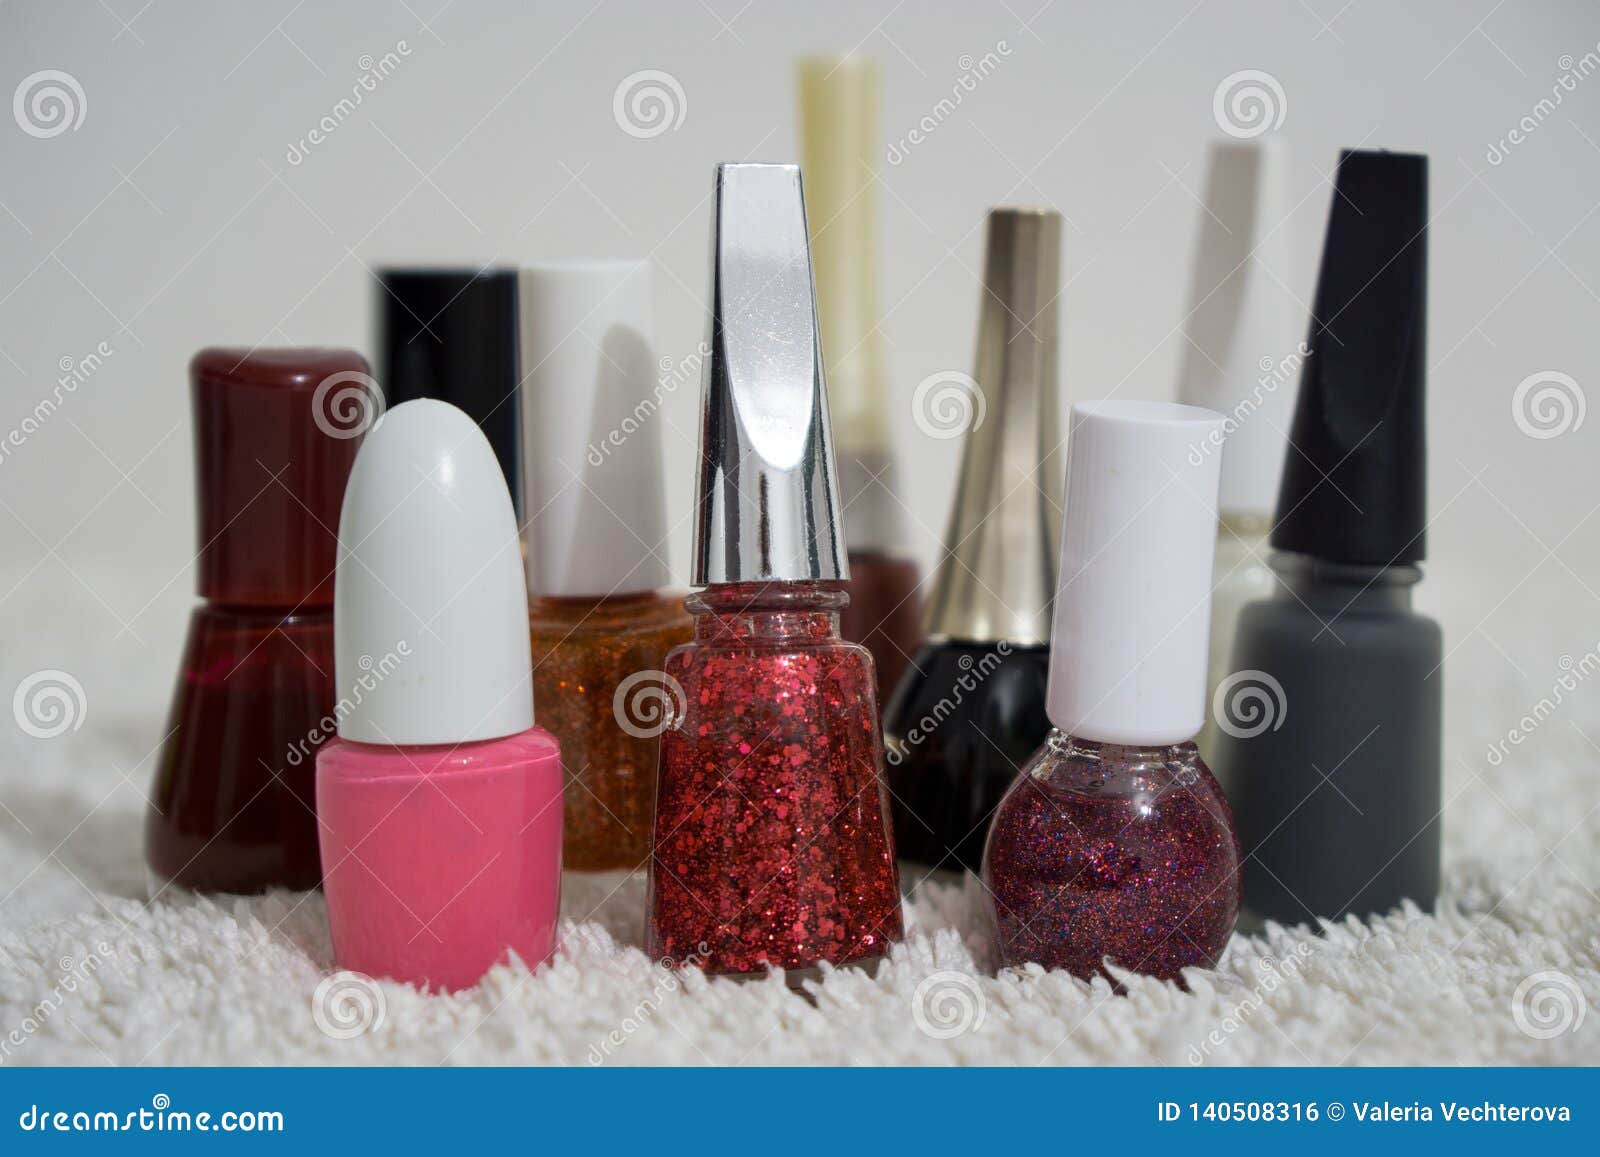 Nail Polishes of Many Colors on a Table. Stock Photo - Image of ...